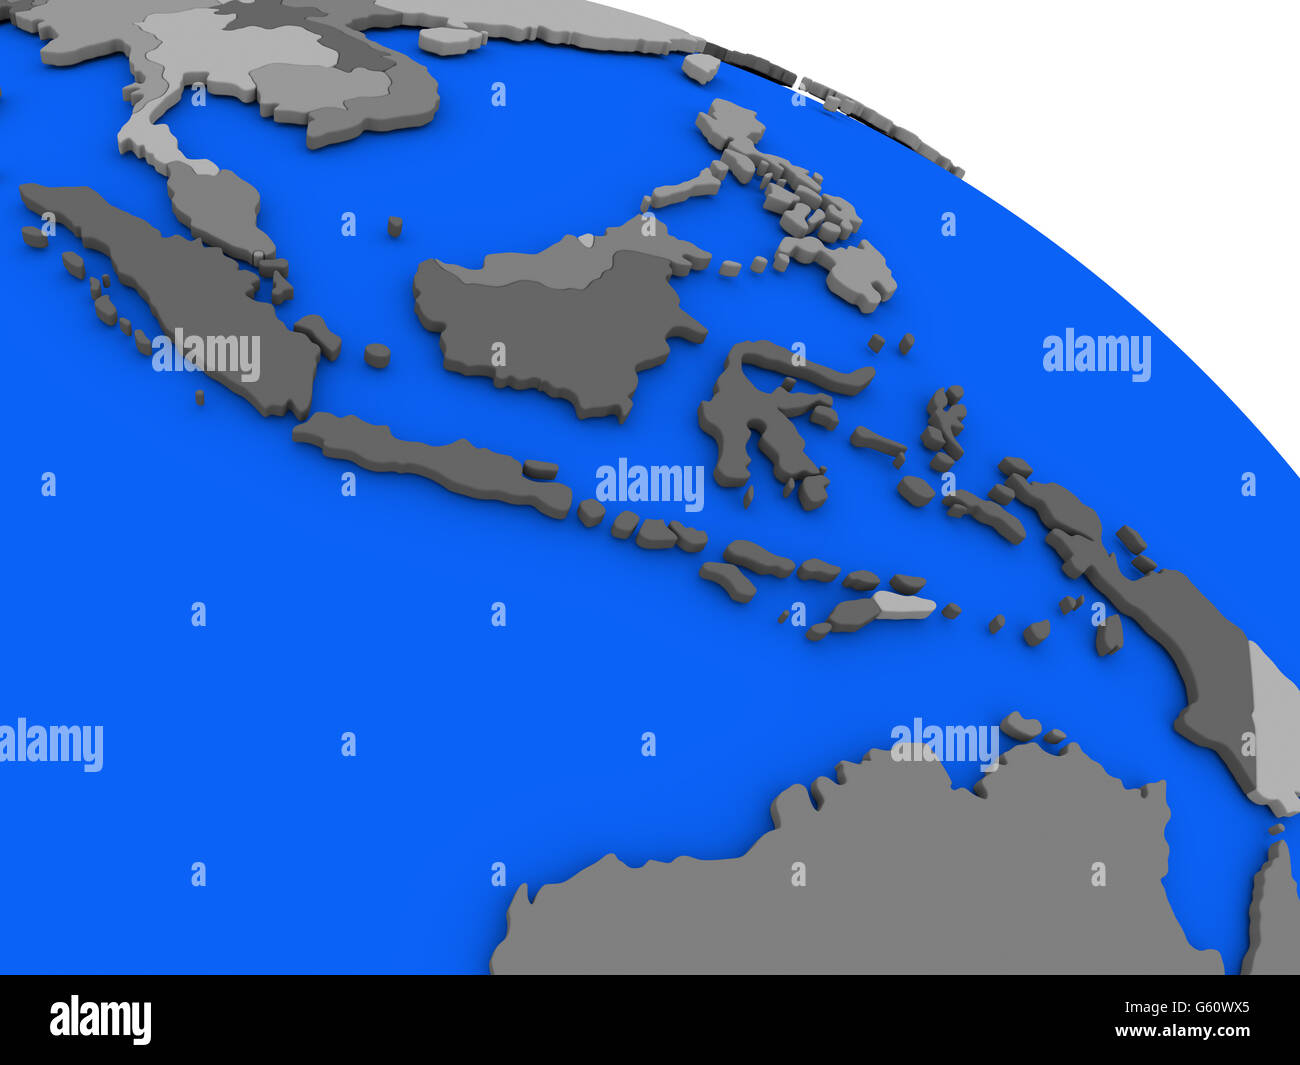 Map of Indonesia on 3D model of Earth with countries in various shades of grey and blue oceans. 3D illustration Stock Photo